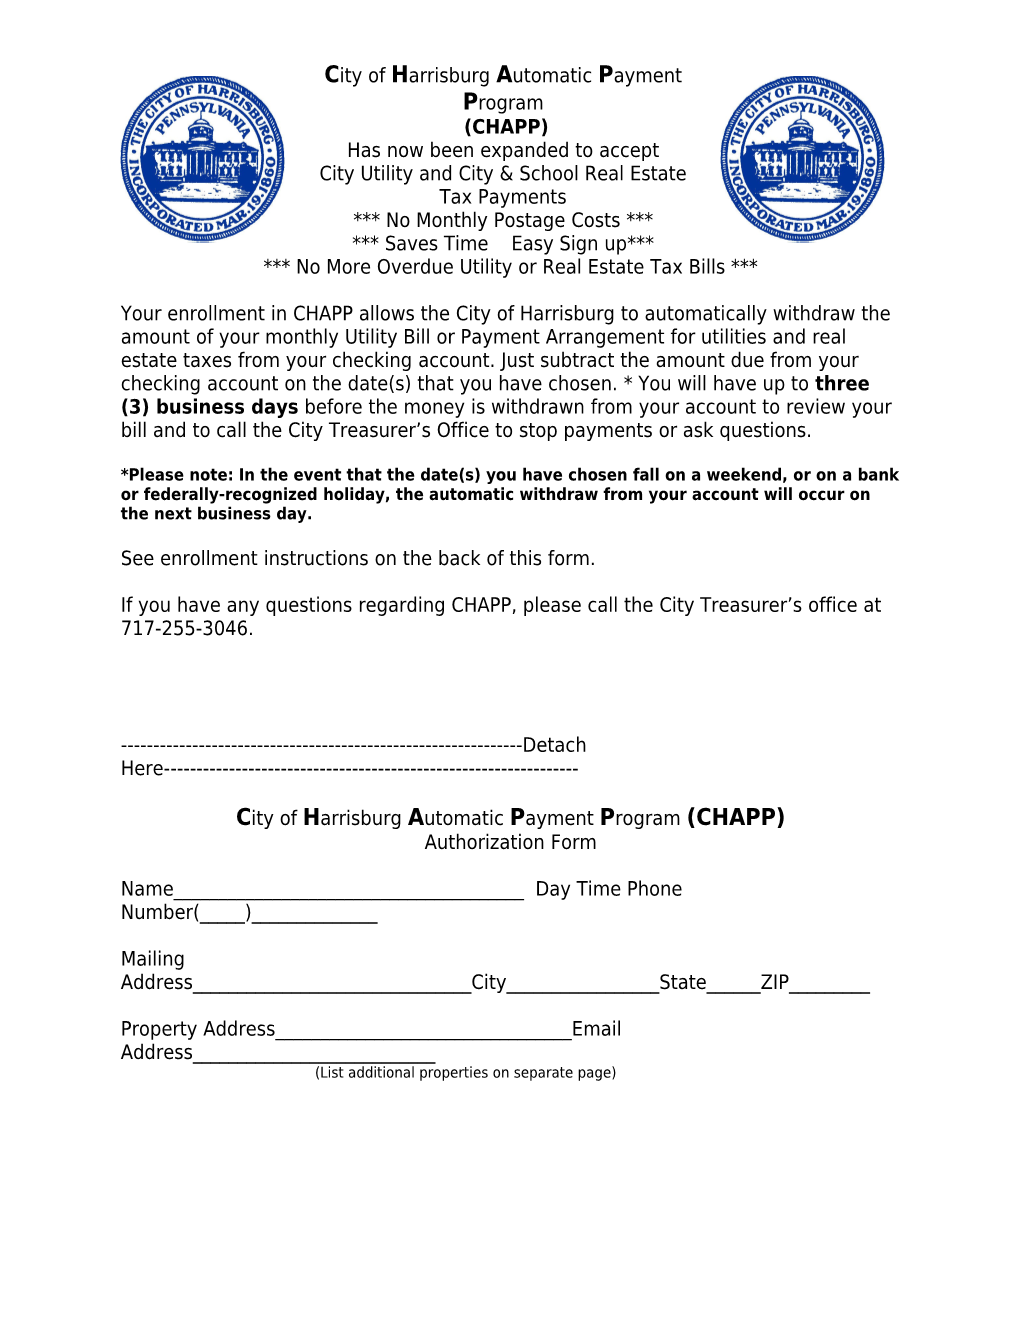 City of Harrisburg Automatic Payment Program